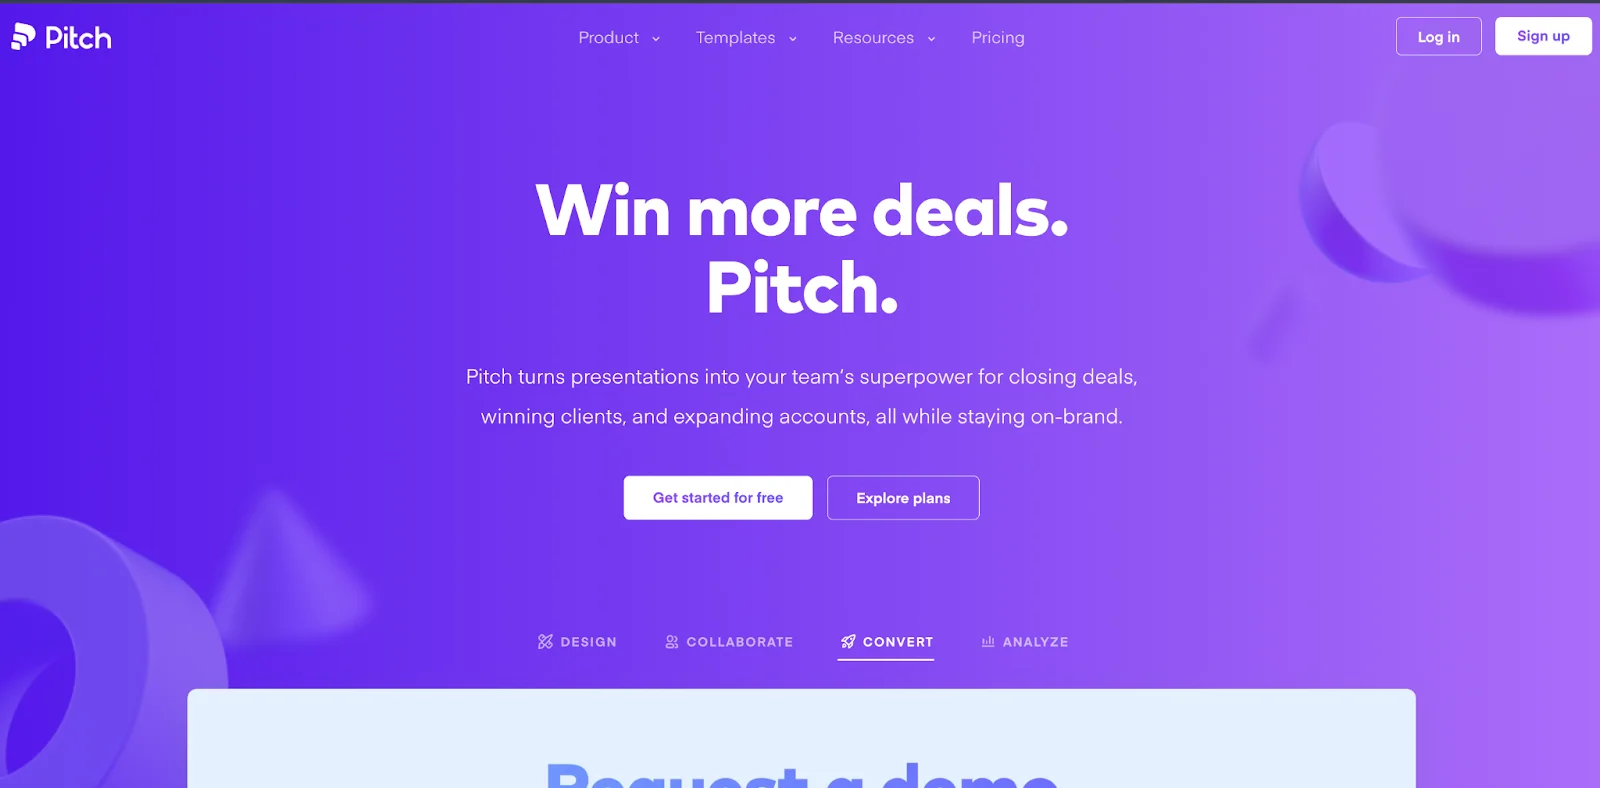 pitch.com is has a simple yet effective website design